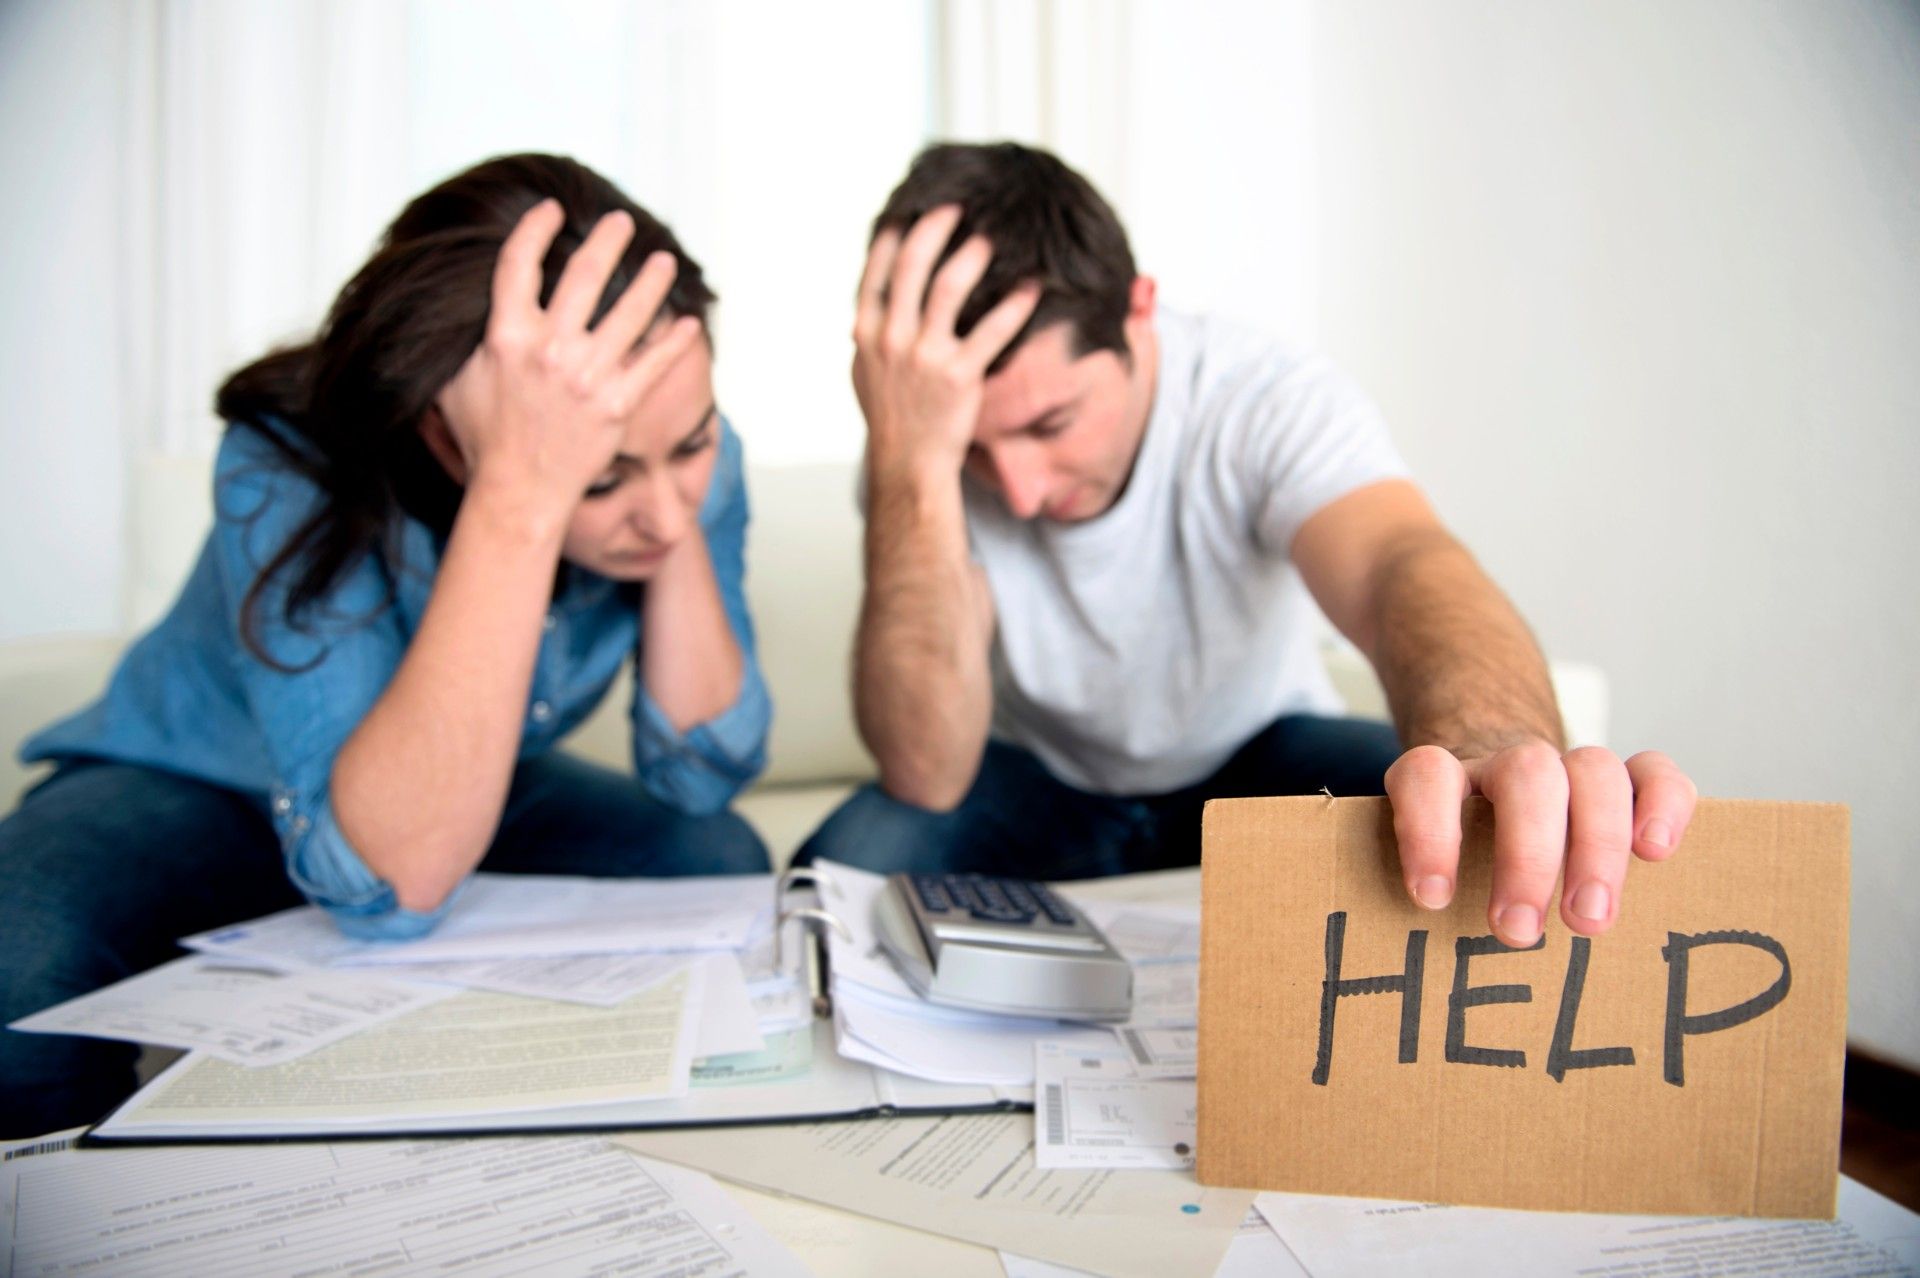 Couple stressed out over bills; man holds sign that says "help"